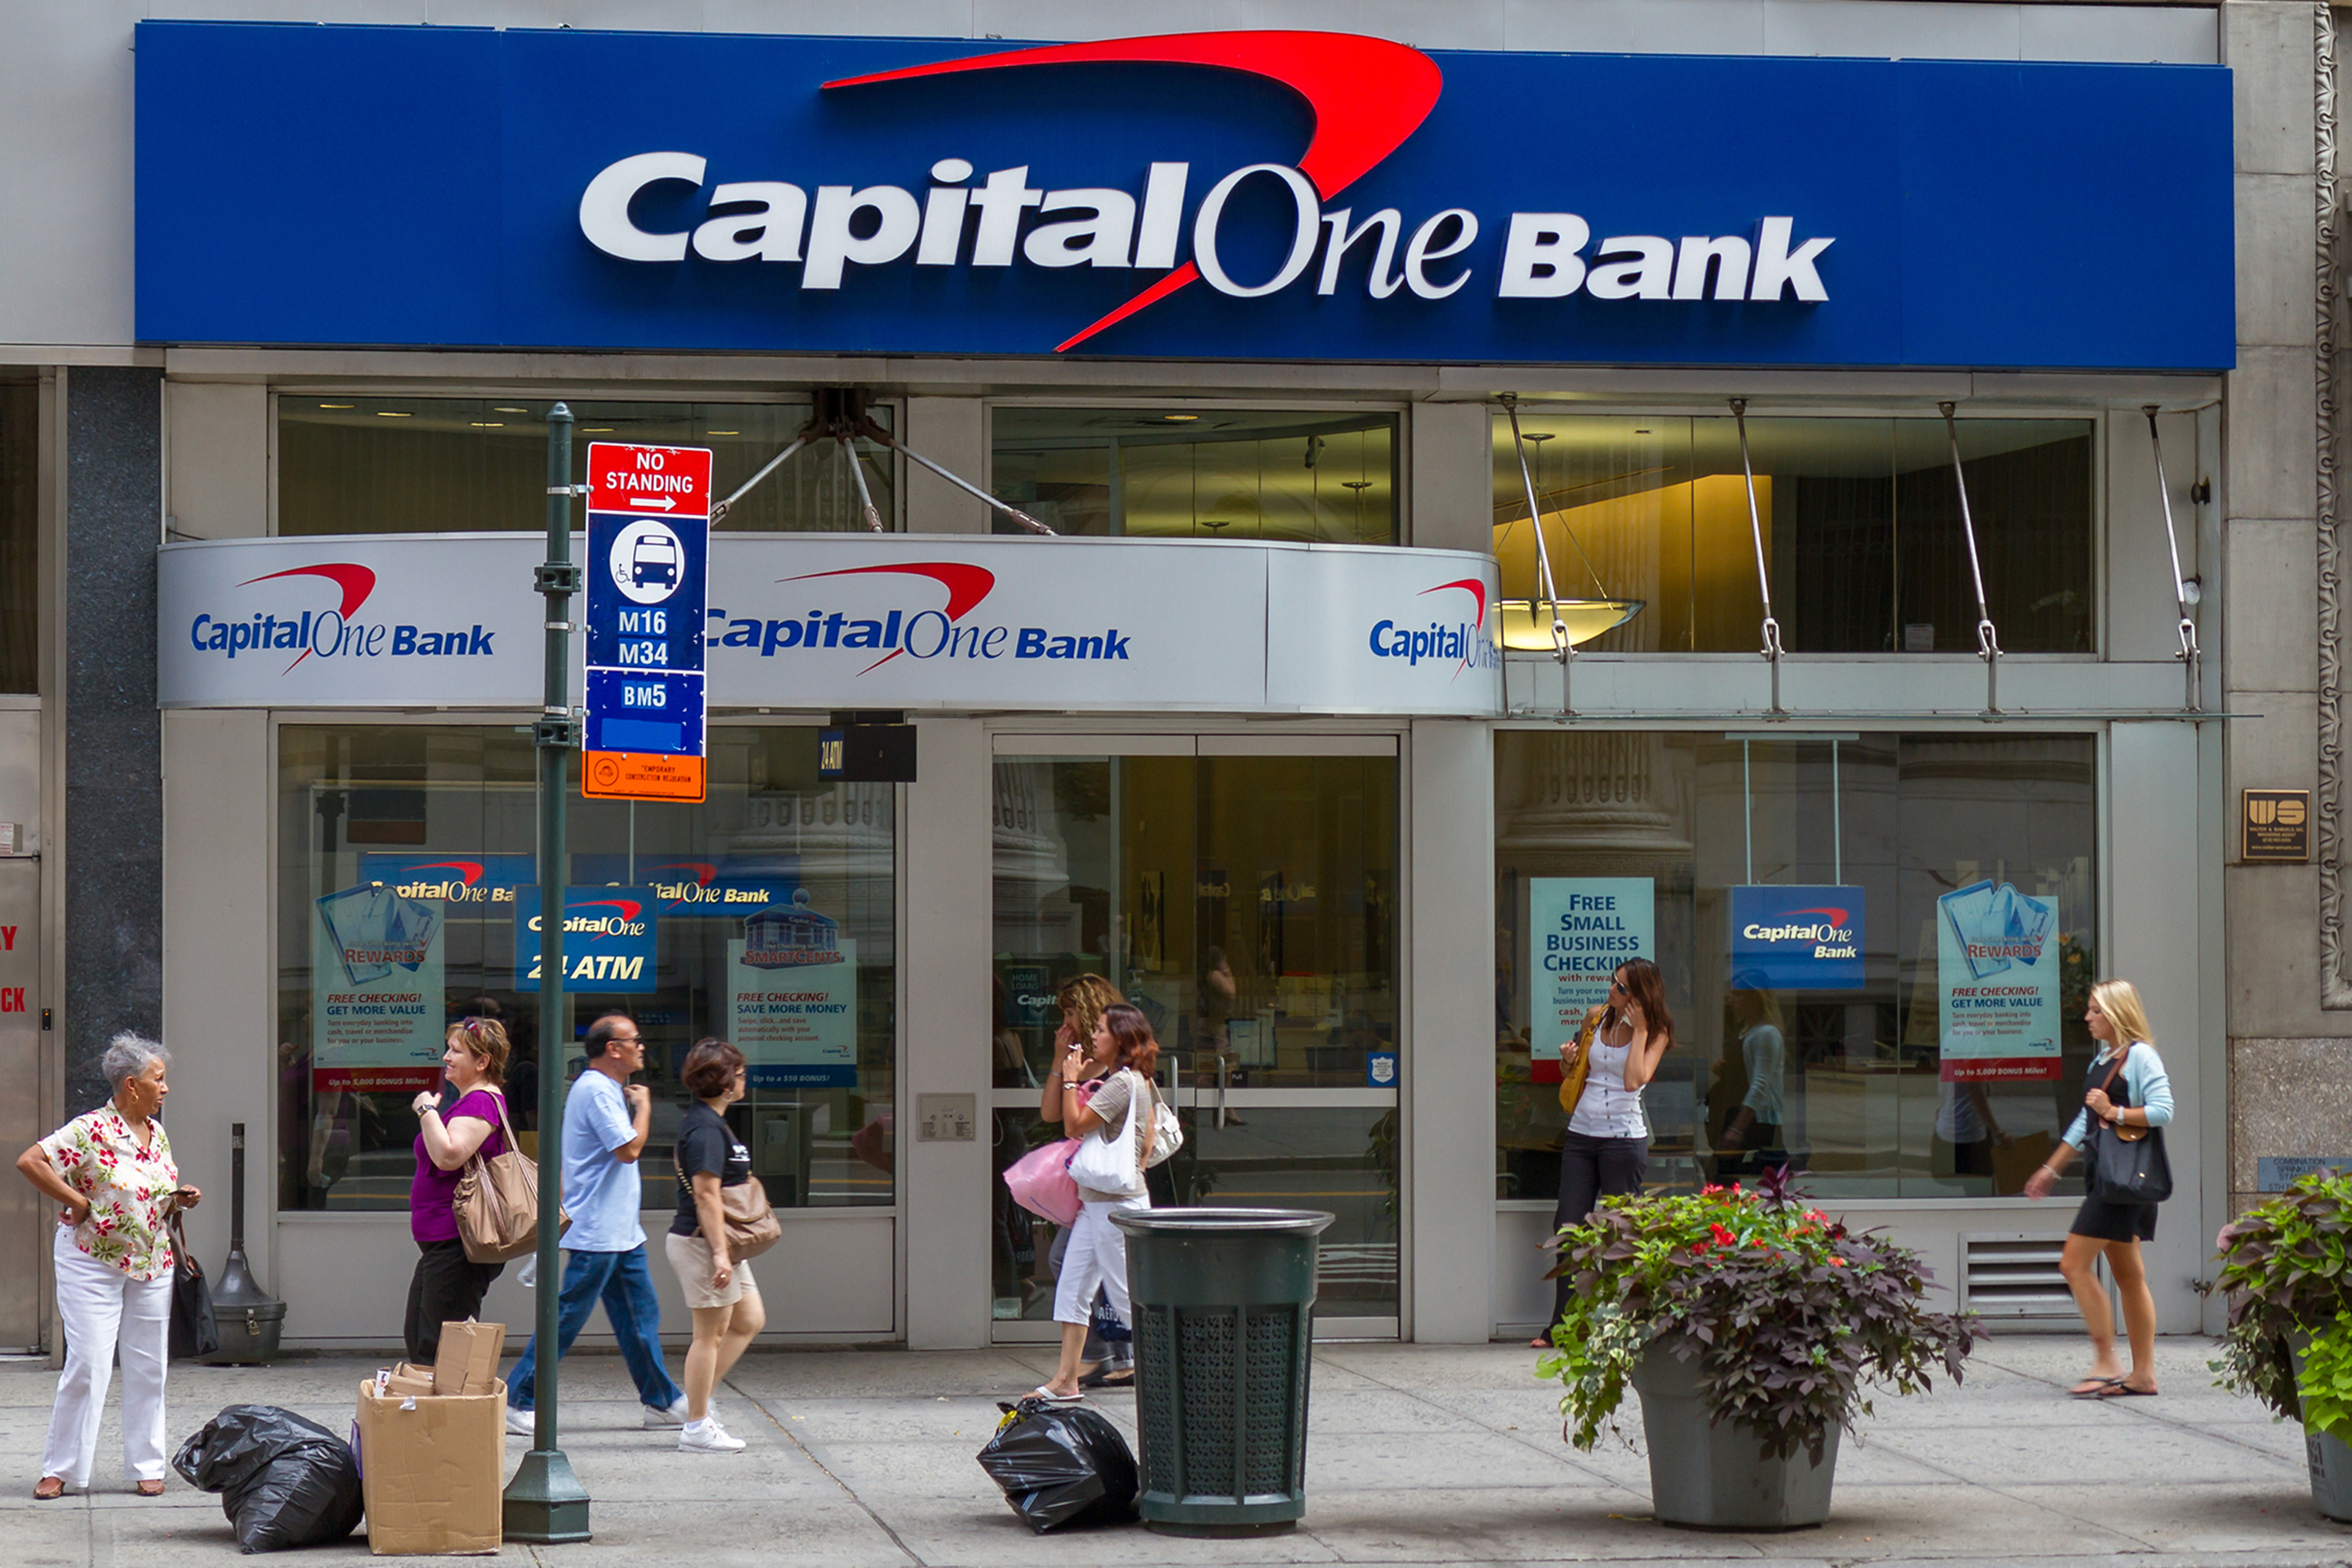 40 HQ Photos Capital One Bank Apply / I Worked At Capital One Hacks Like This Are Most Dangerous For Low Income People